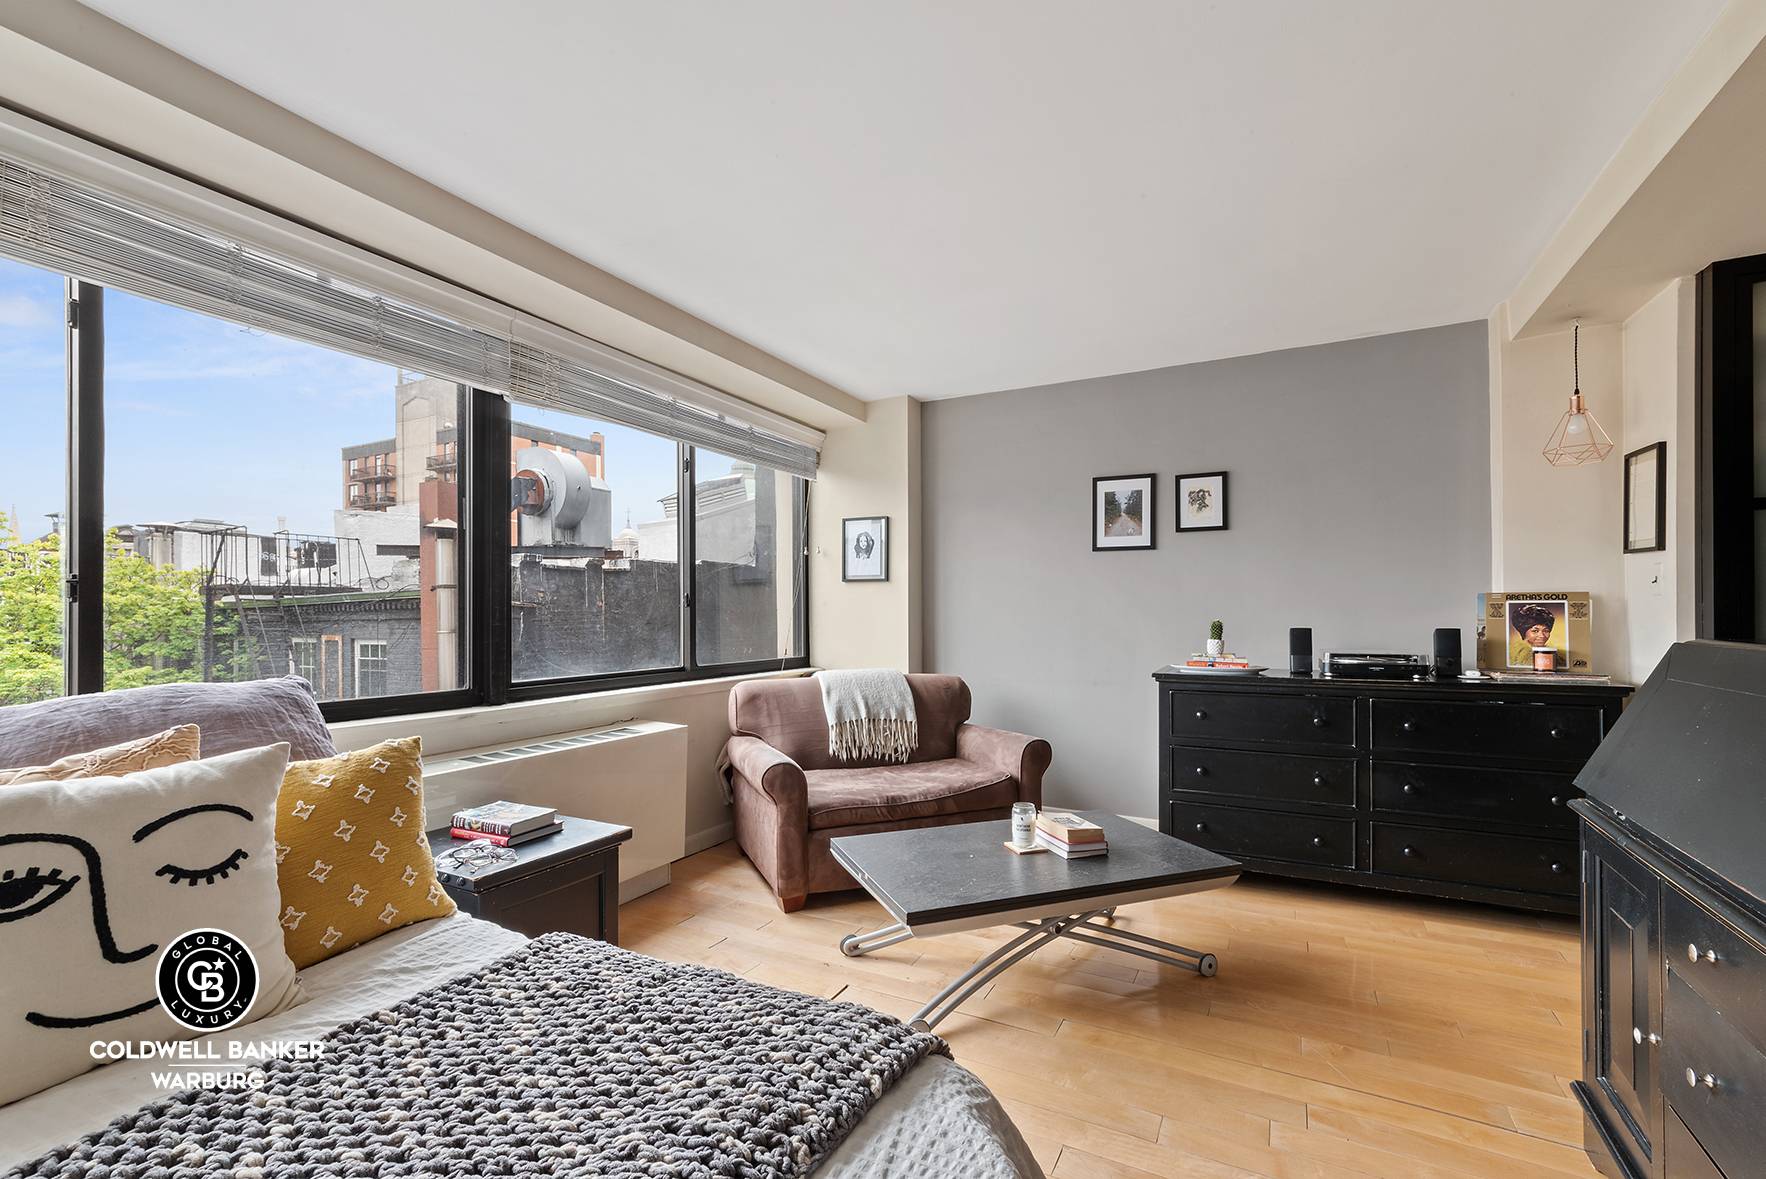 Amazing investment opportunity in a perfectly situated condo building in the heart of the village, just a block from the Astor Place 6 train stop.